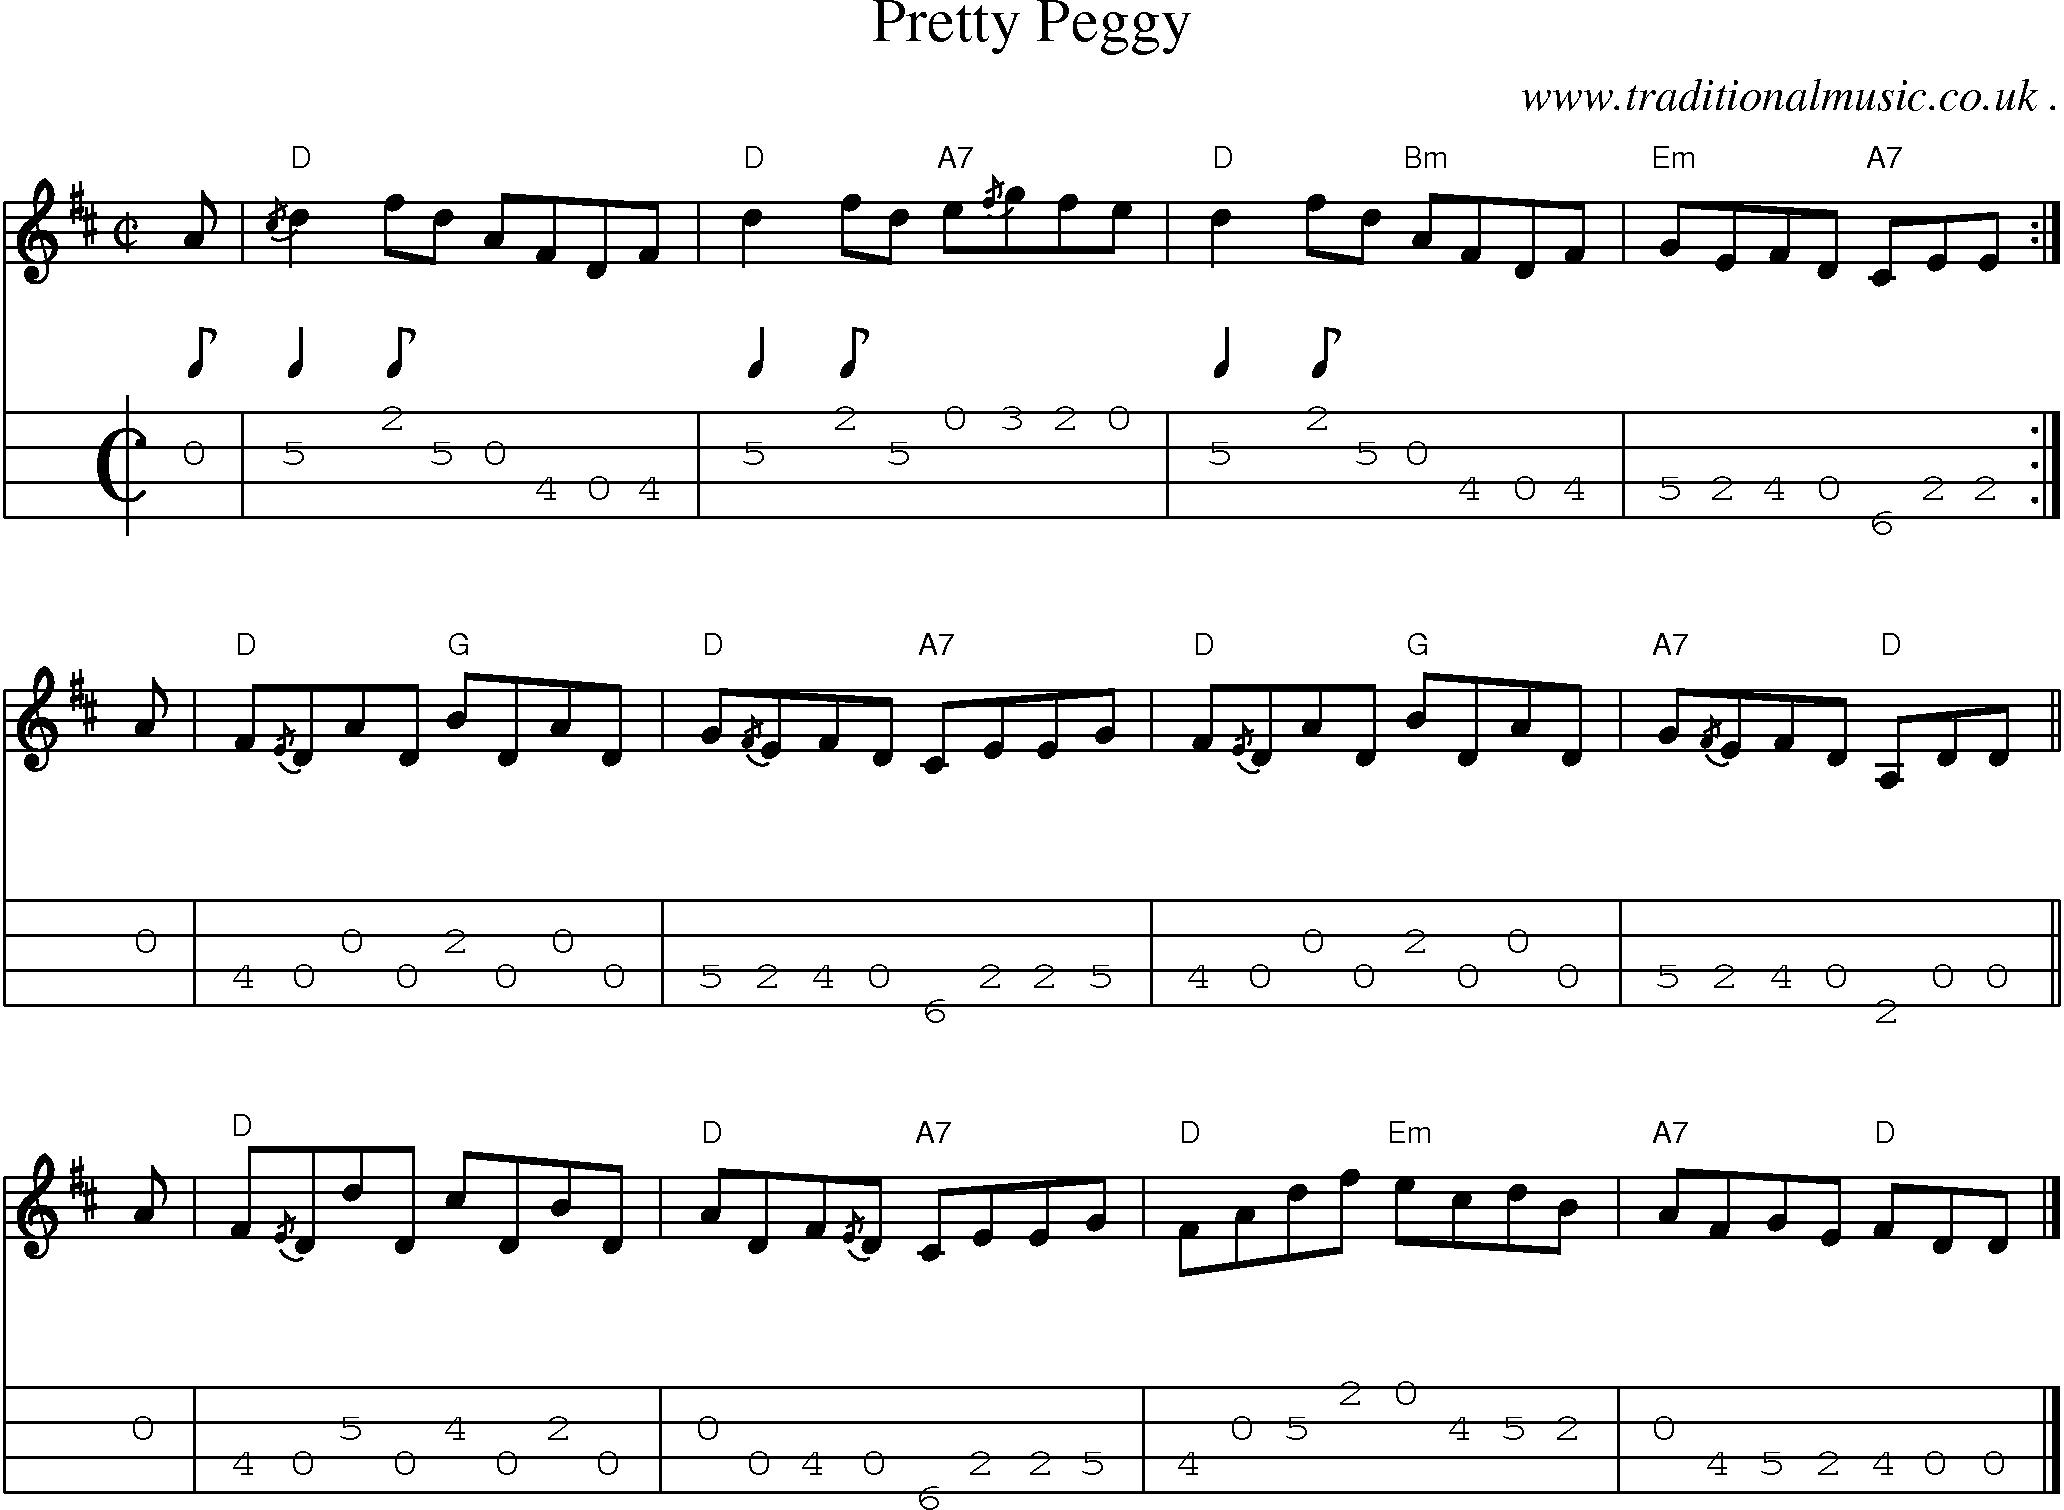 Sheet-music  score, Chords and Mandolin Tabs for Pretty Peggy